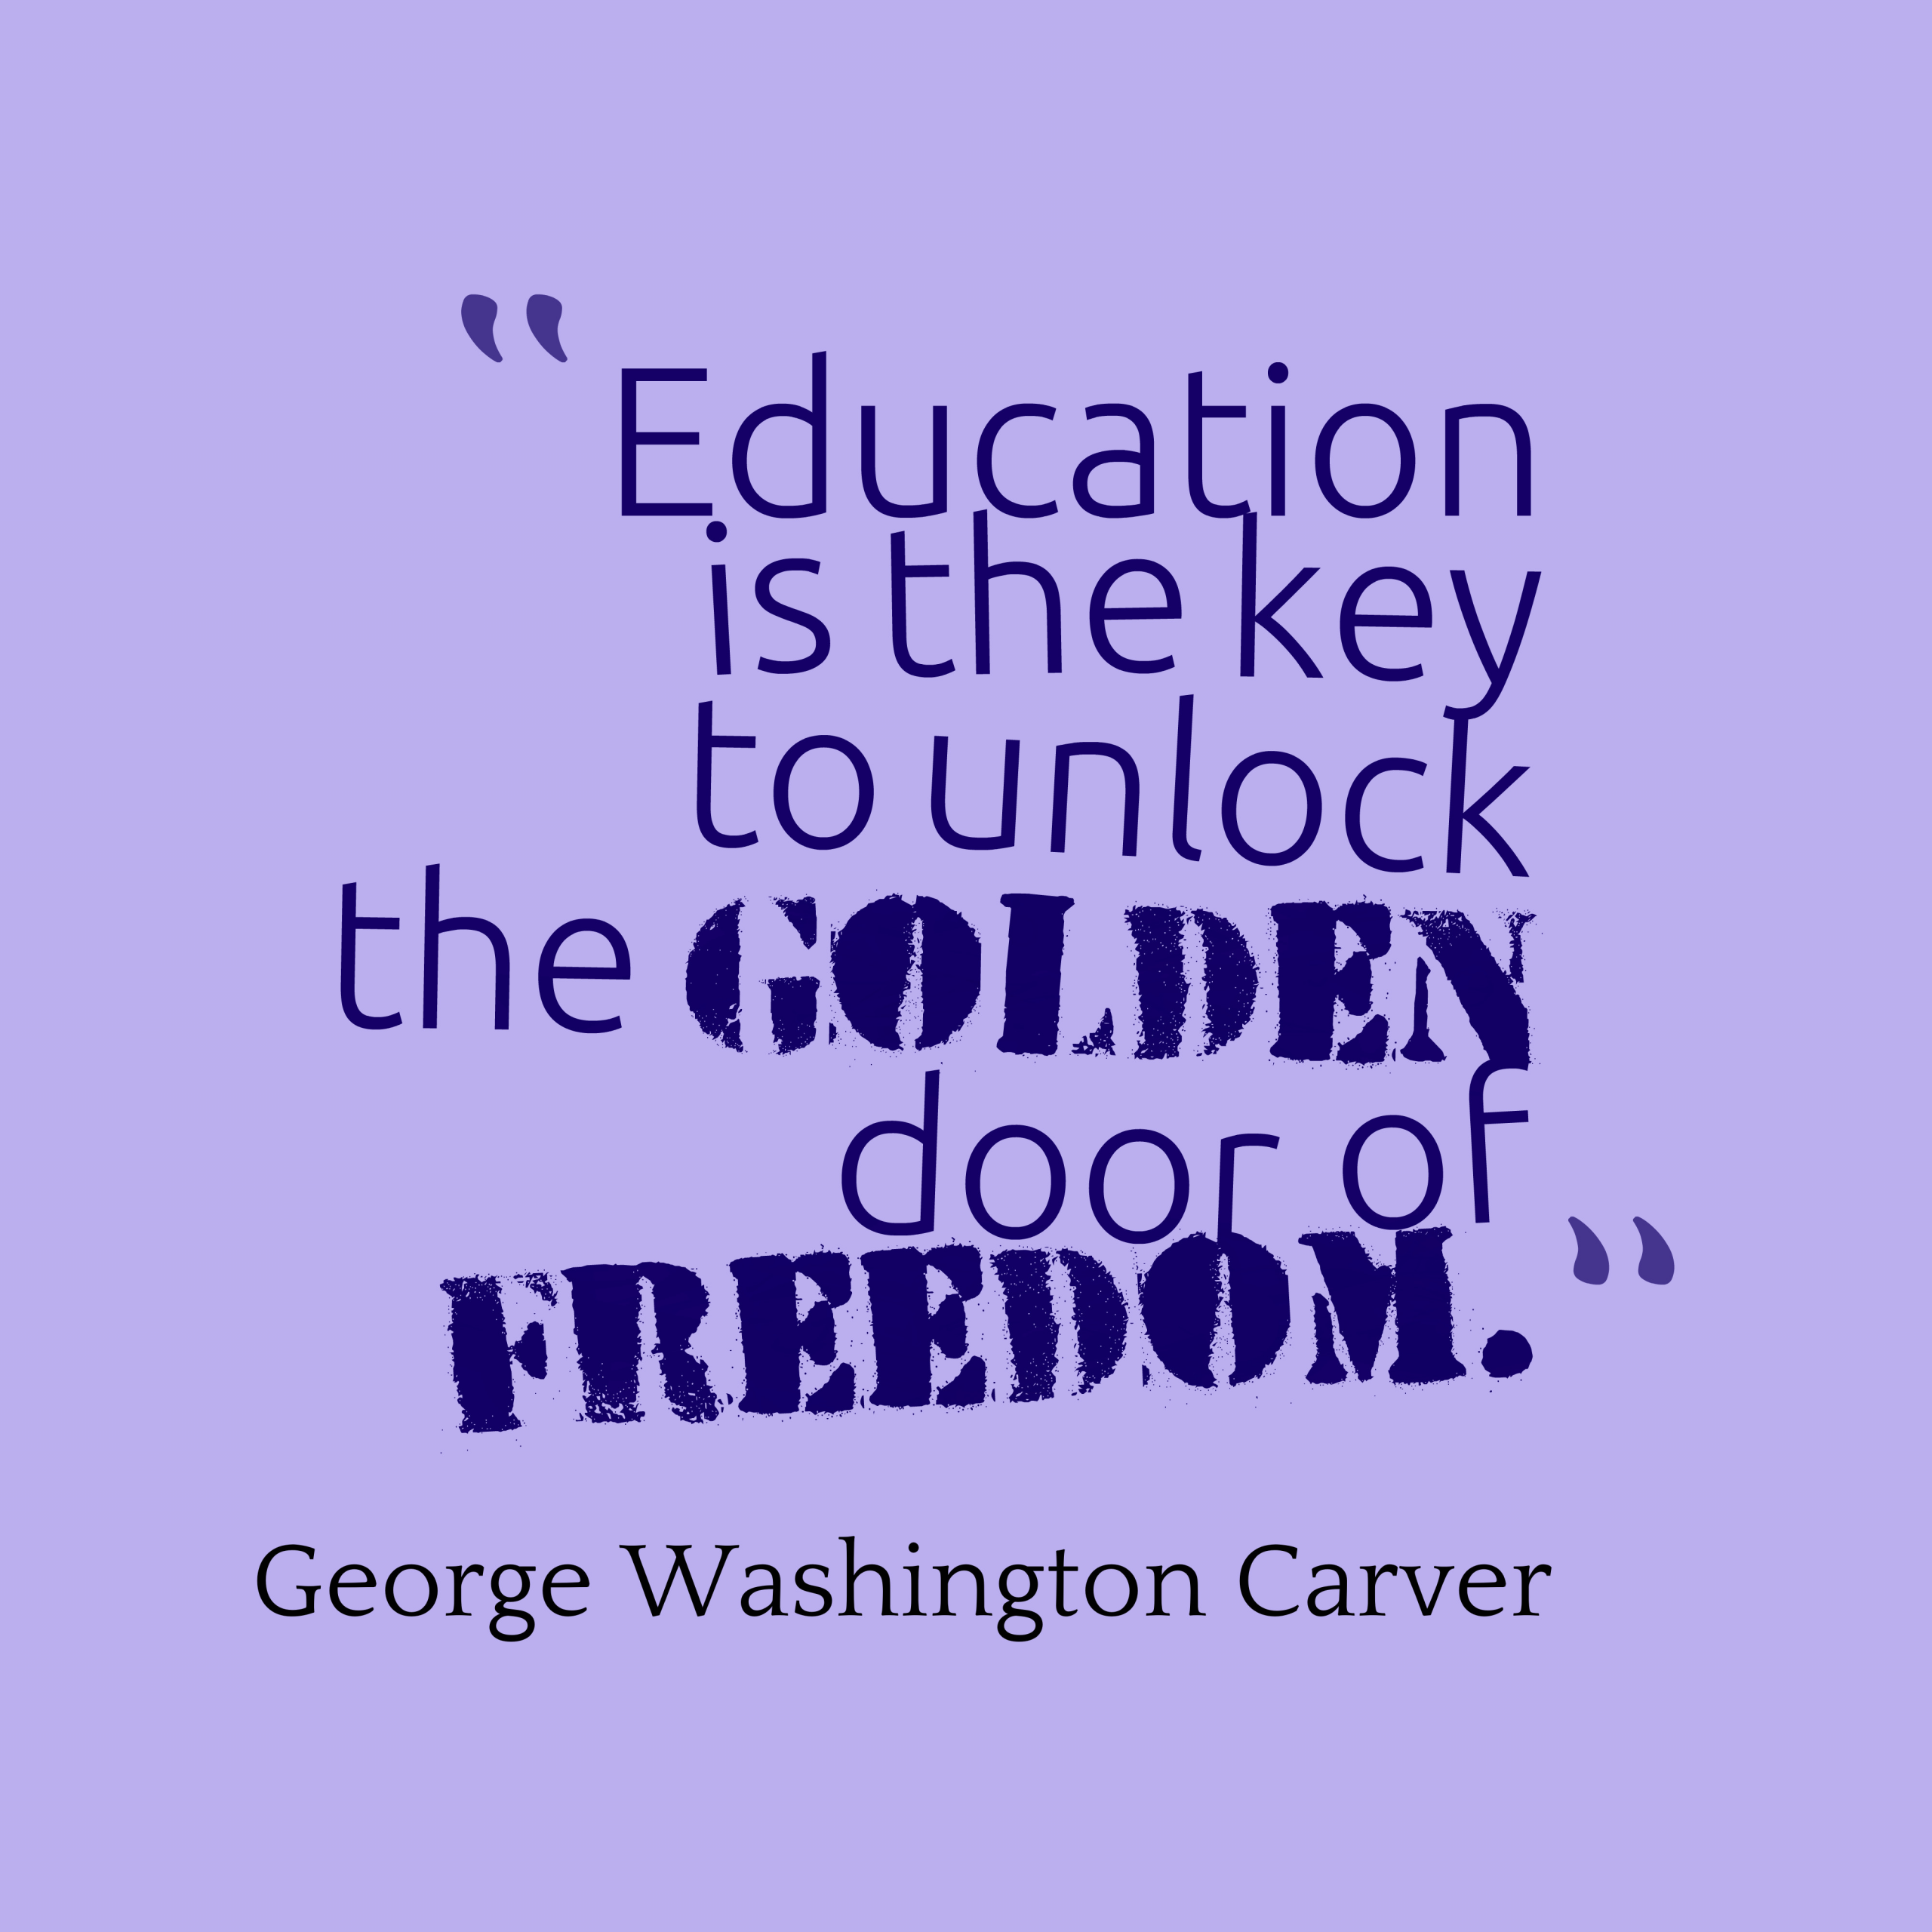 Quote On The Importance Of Education
 Famous Quotes Importance Education QuotesGram